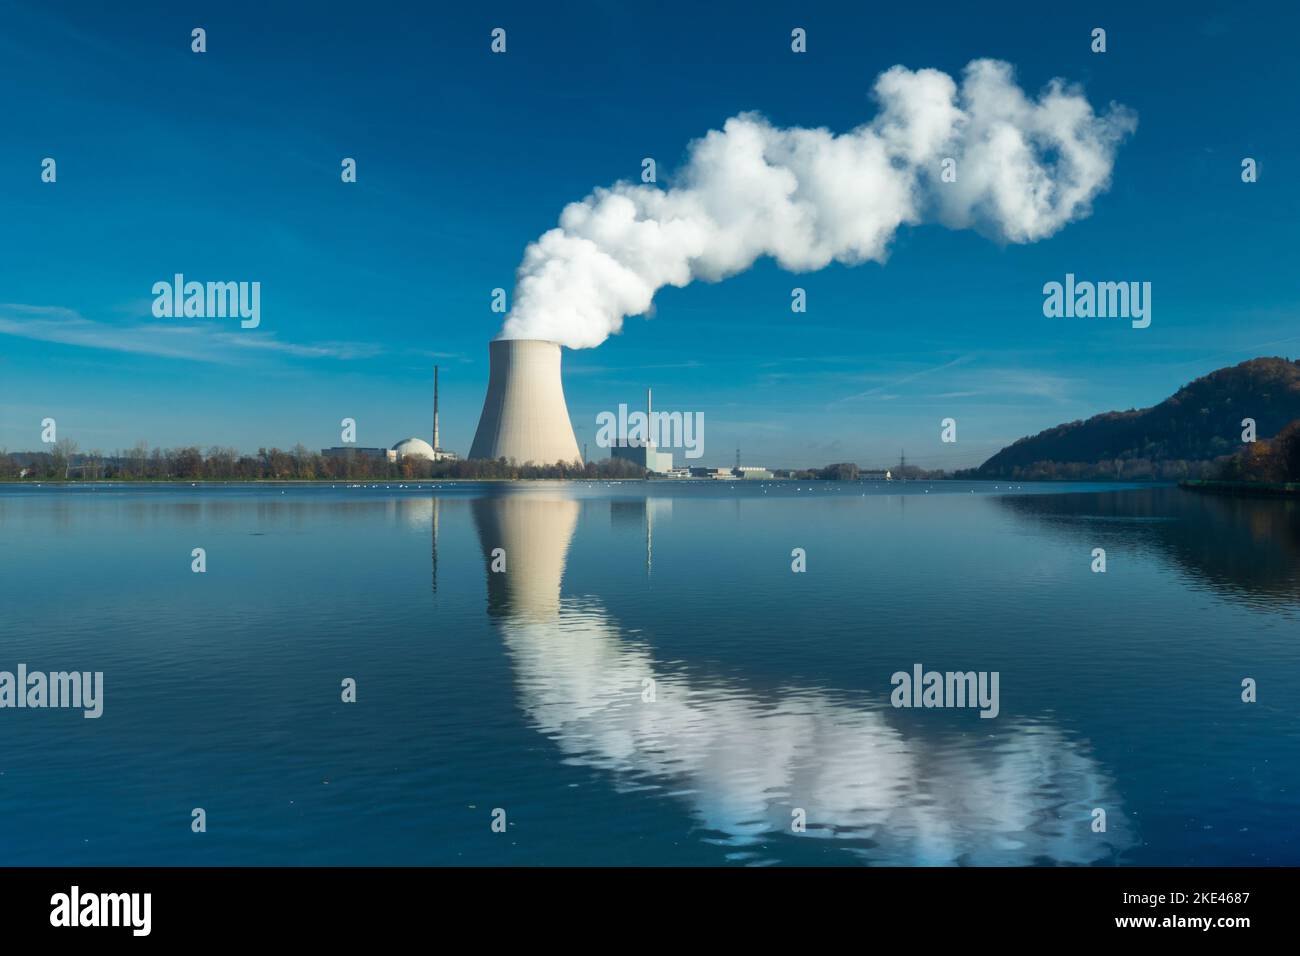 Atomkraftwerk Isar 2 in Betrieb /                 Nuclear power plant Isar 2 in operation / Stock Photo